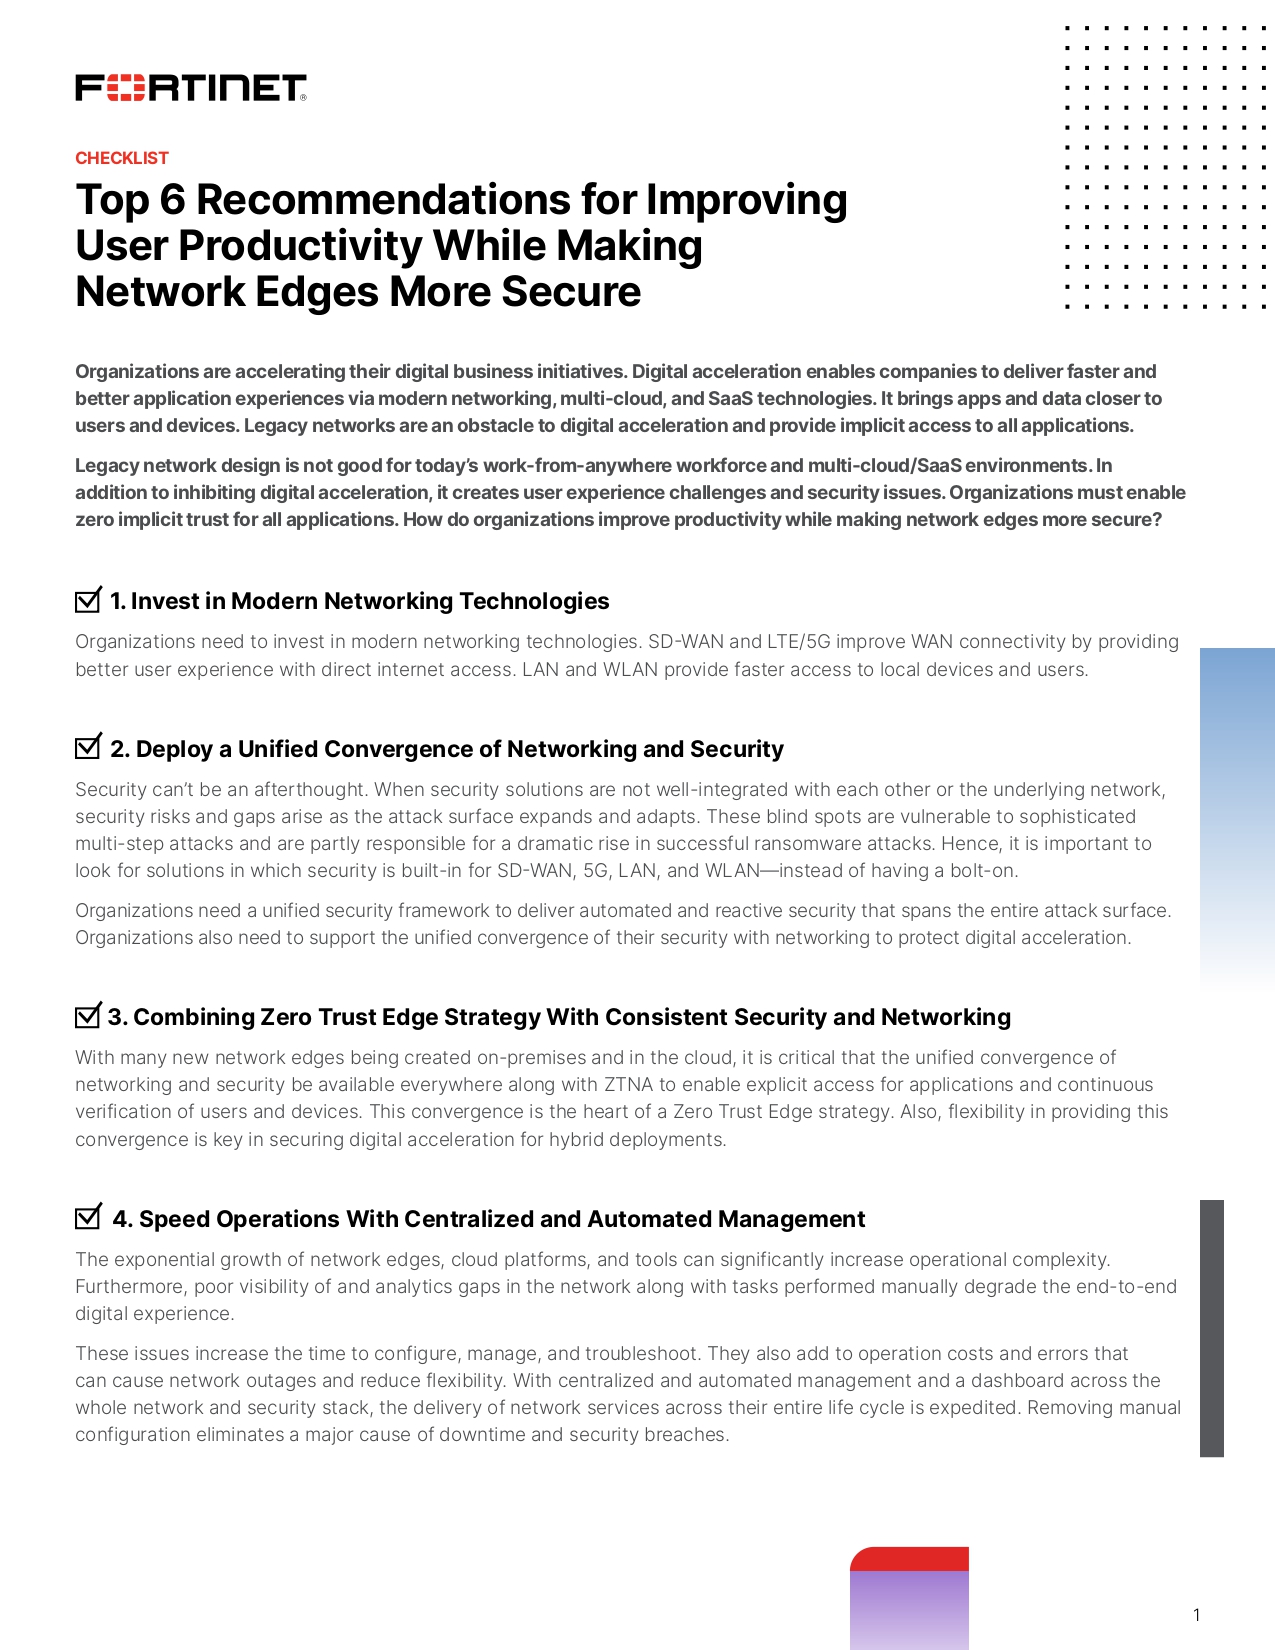 Fortinet-top6-recommendations-for-improving-user-productivity